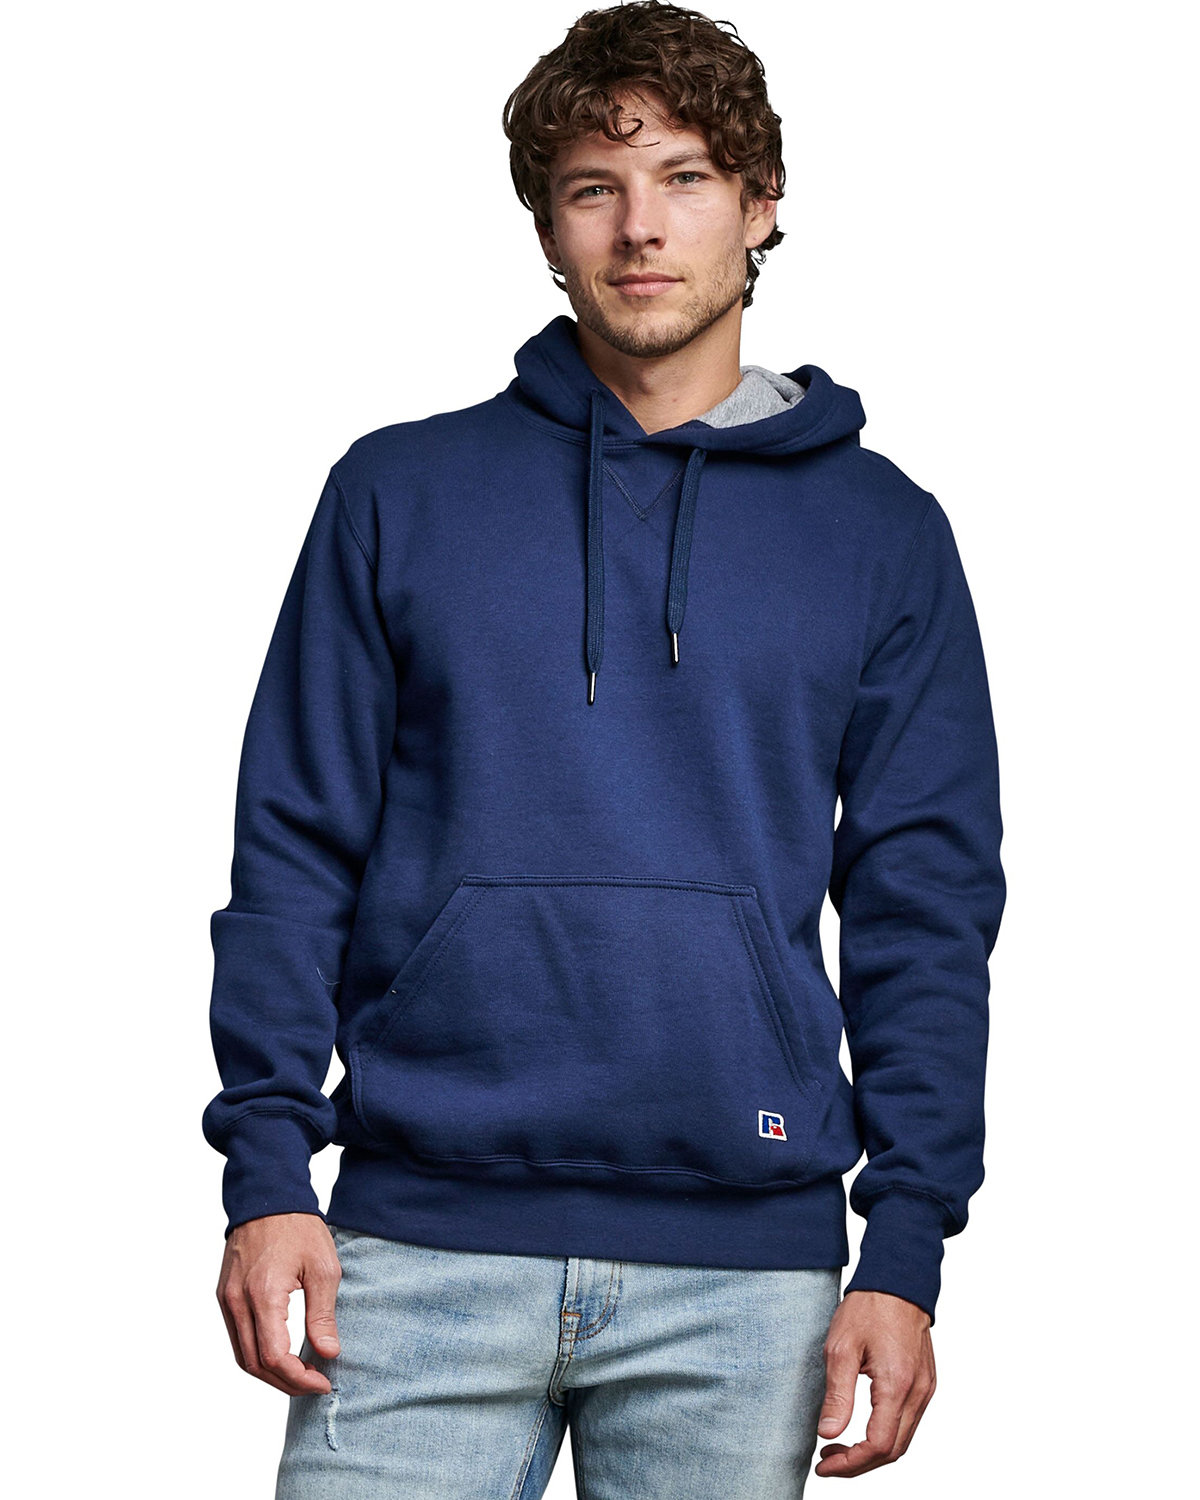 Russell Athletic Unisex Cotton Classic Hooded Sweatshirt NAVY 